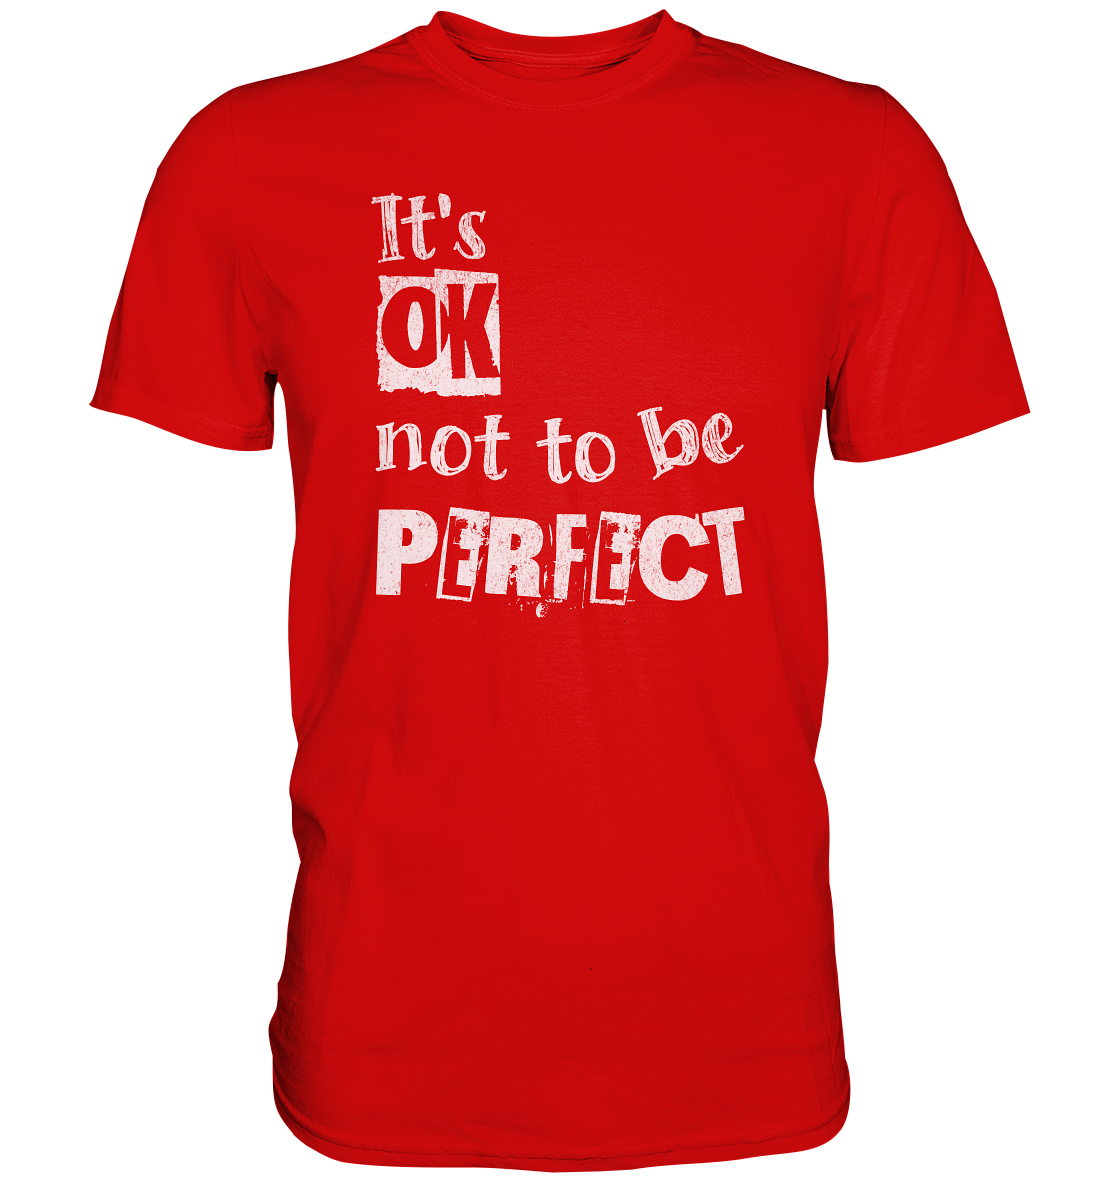 "Its OK not to be perfect" - Premium Shirt